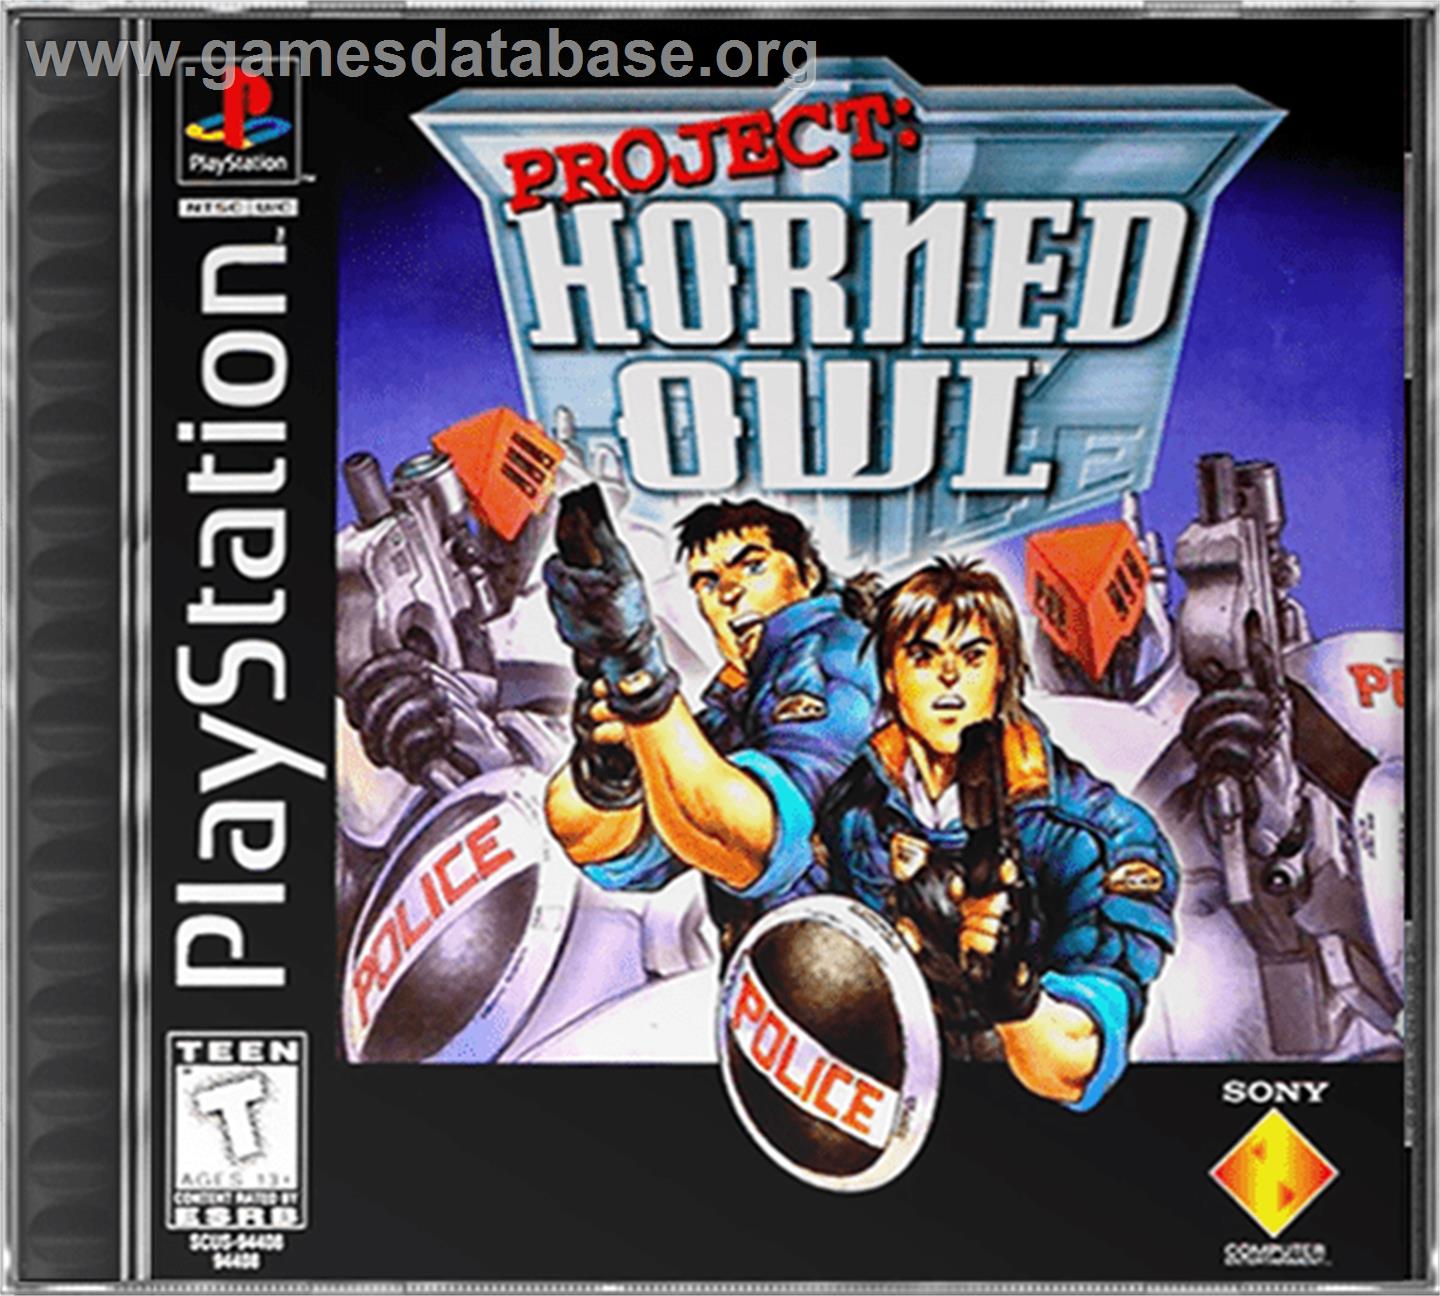 Project: Horned Owl - Sony Playstation - Artwork - Box